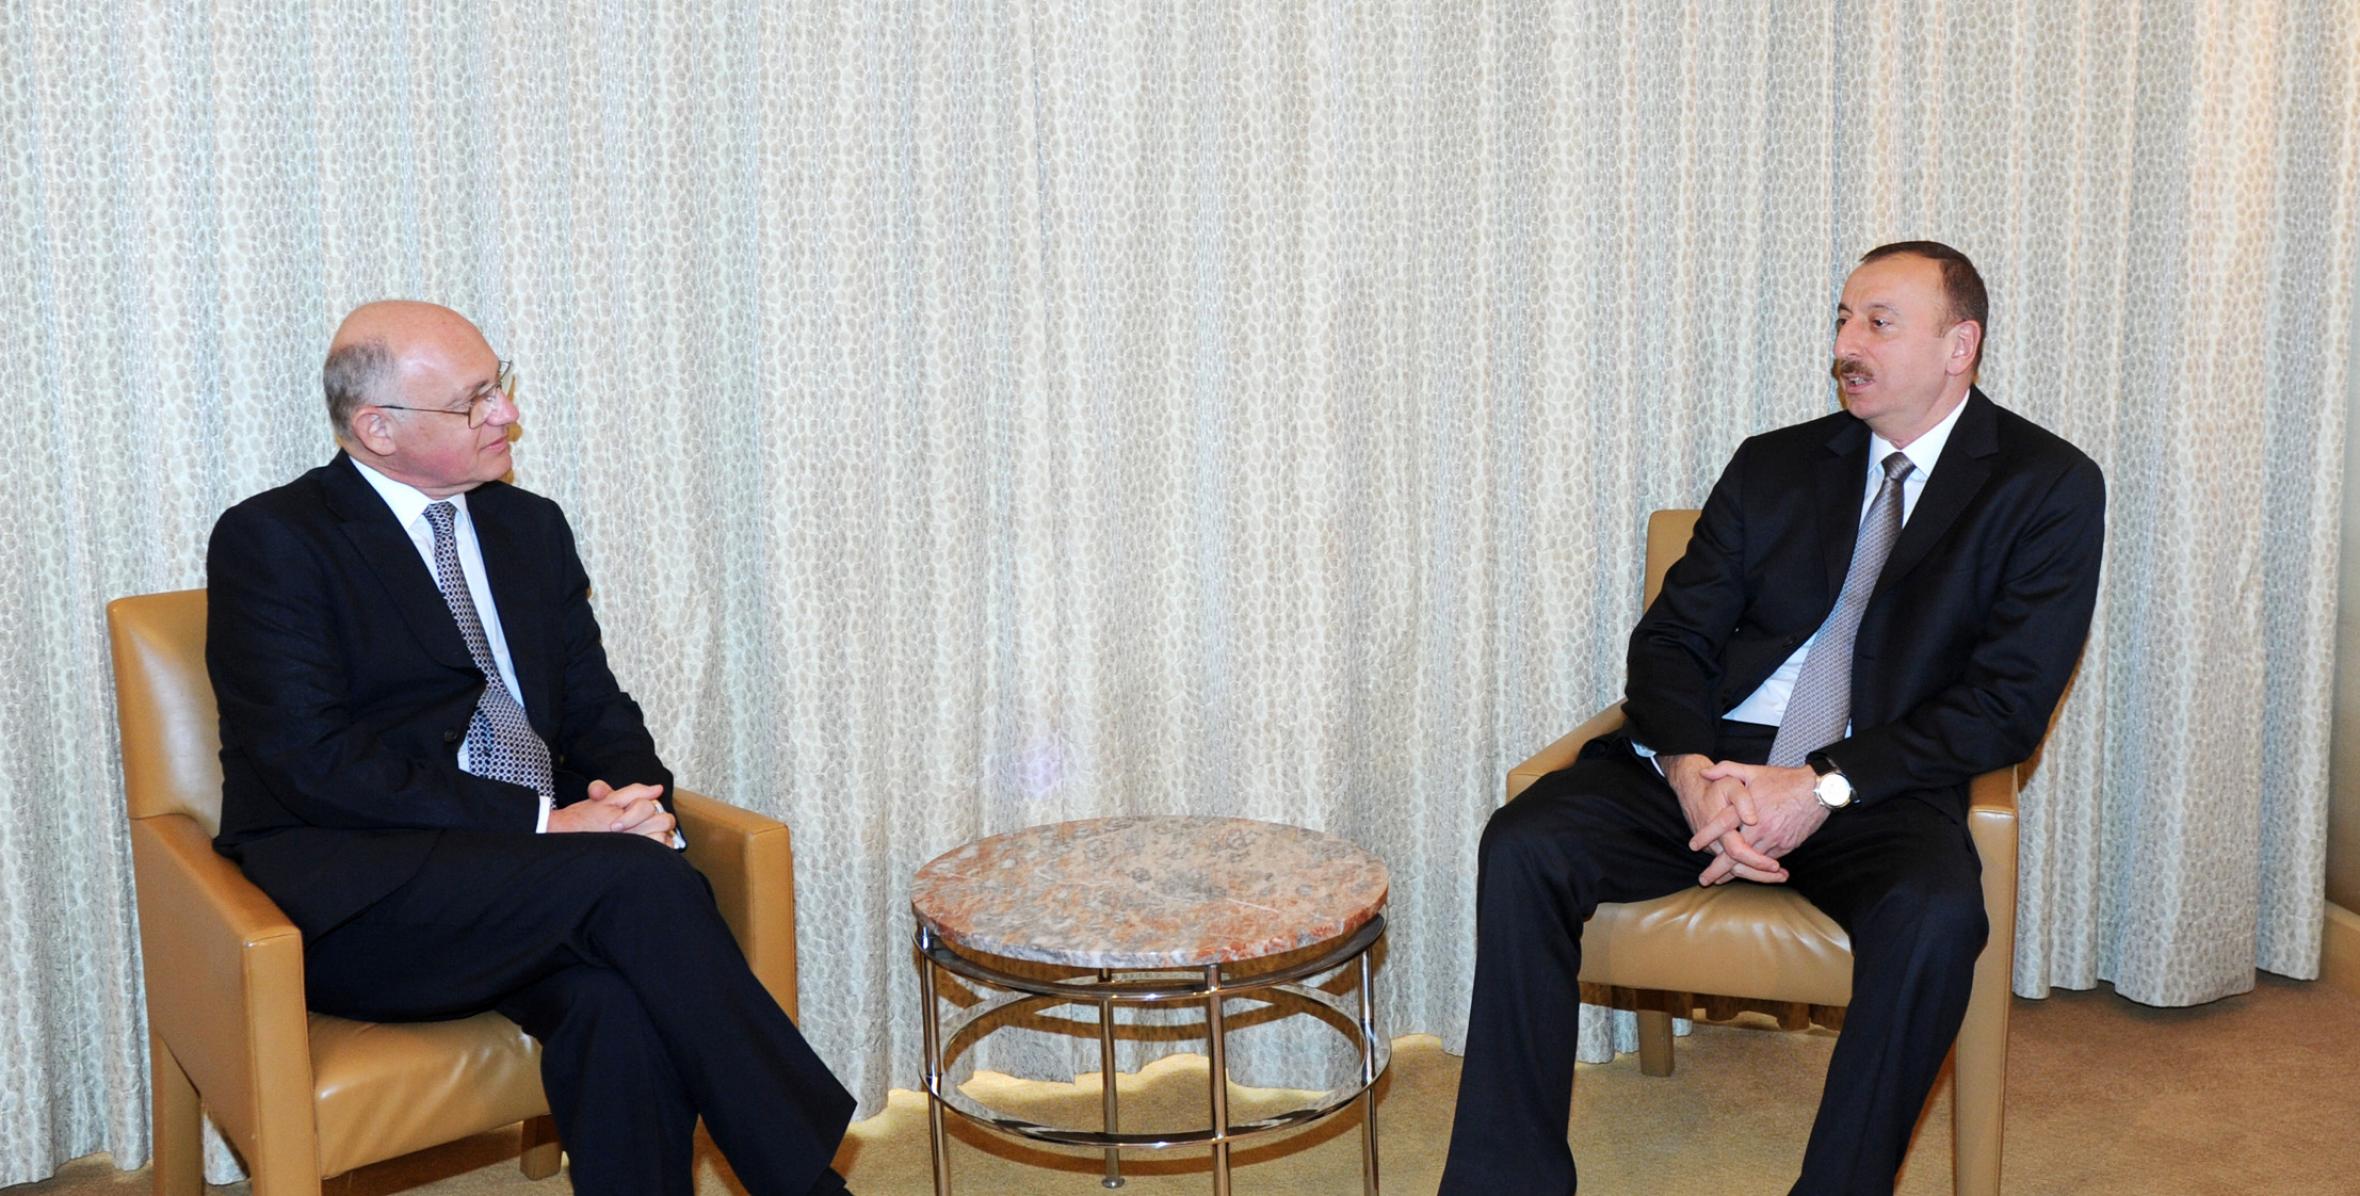 Ilham Aliyev met with the Foreign Minister of Argentina